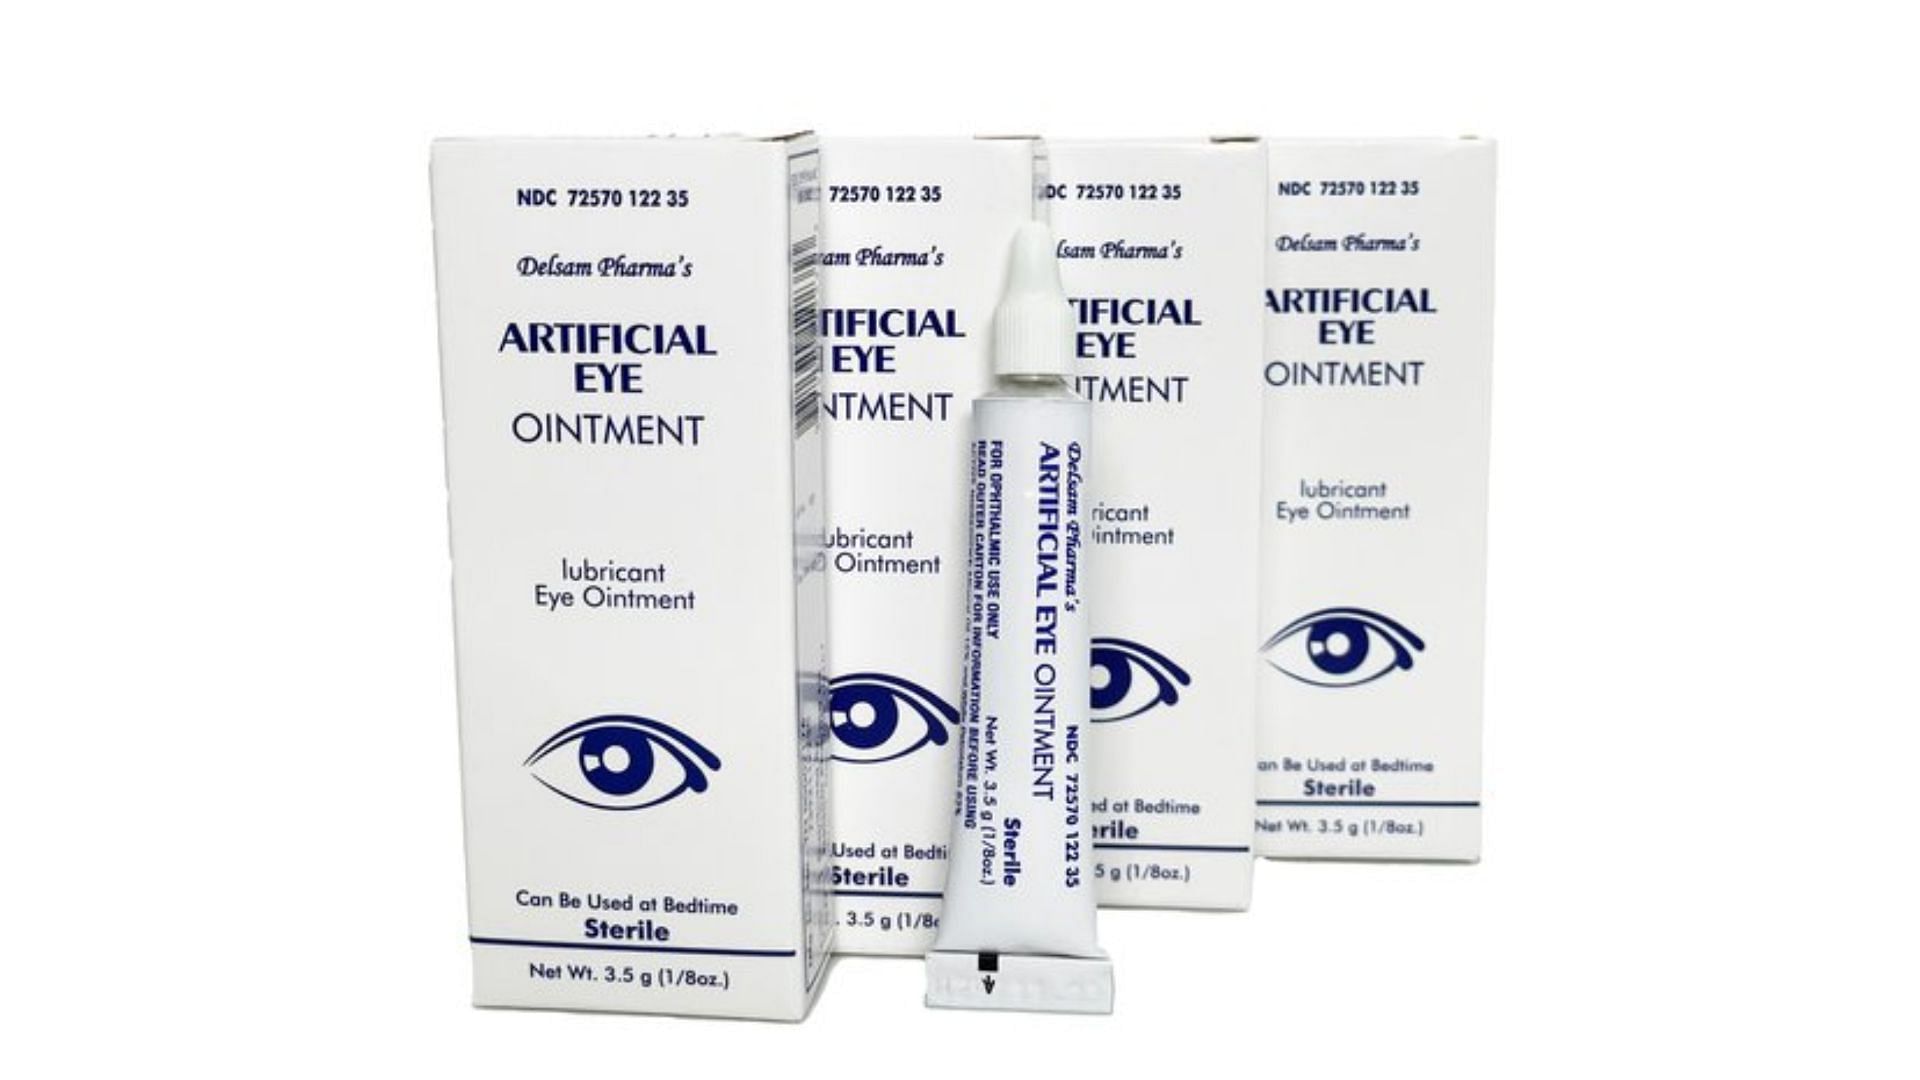 Eye product recall: FDA expands warning over contaminated eye drops to include Delsam Pharma’s Artificial Eye Ointment, amid bacterial outbreak